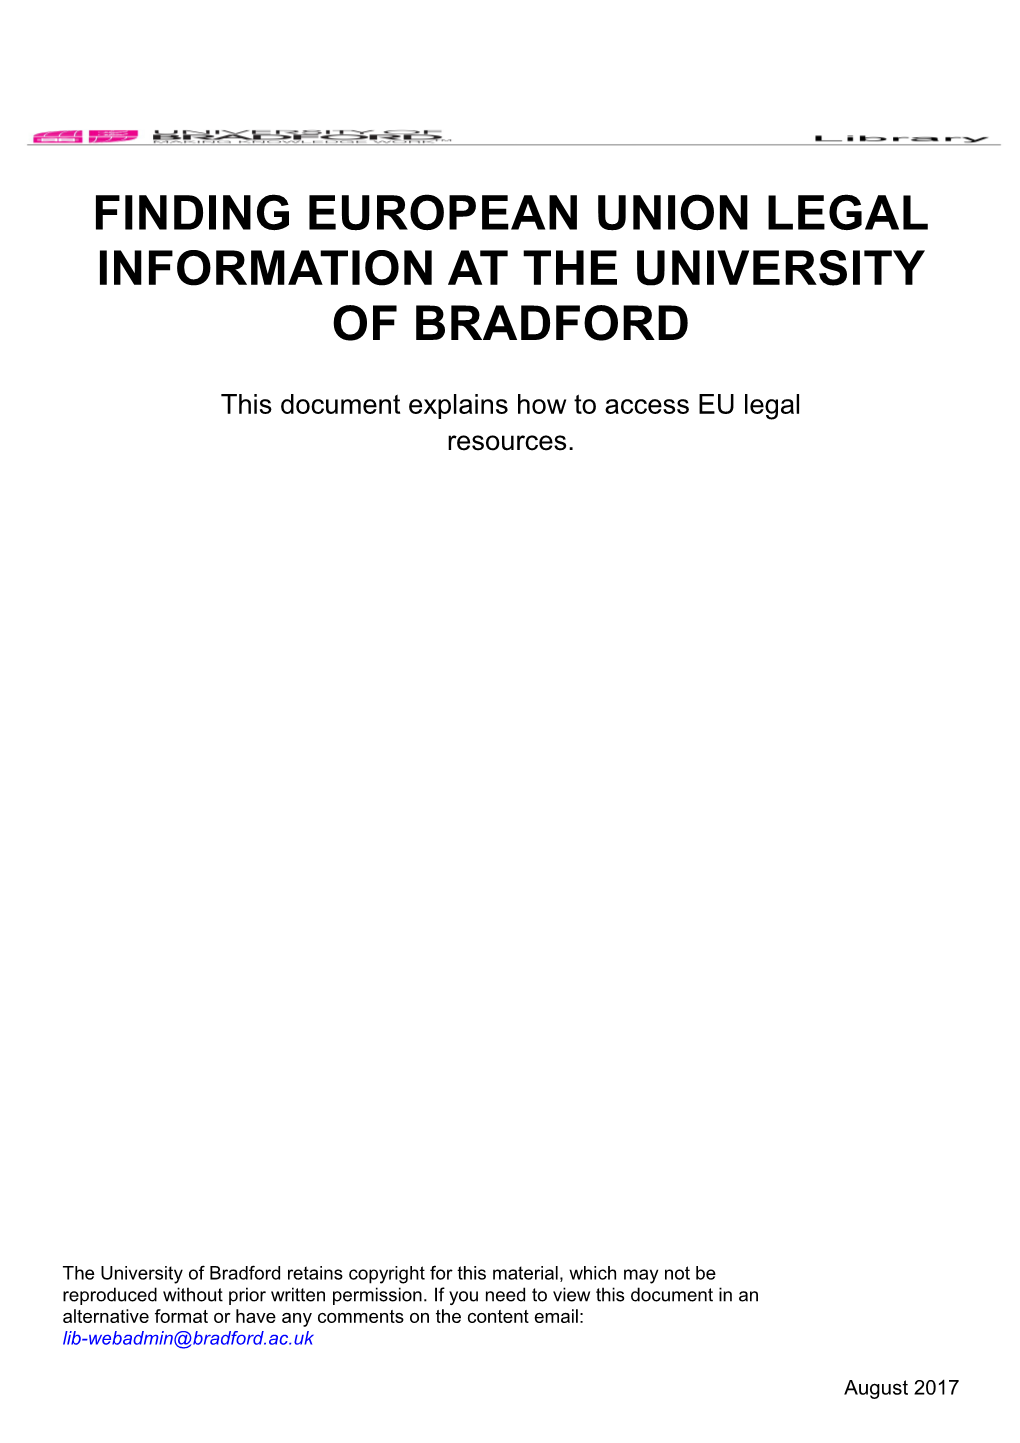 Finding European Union Legal Information at the University of Bradford